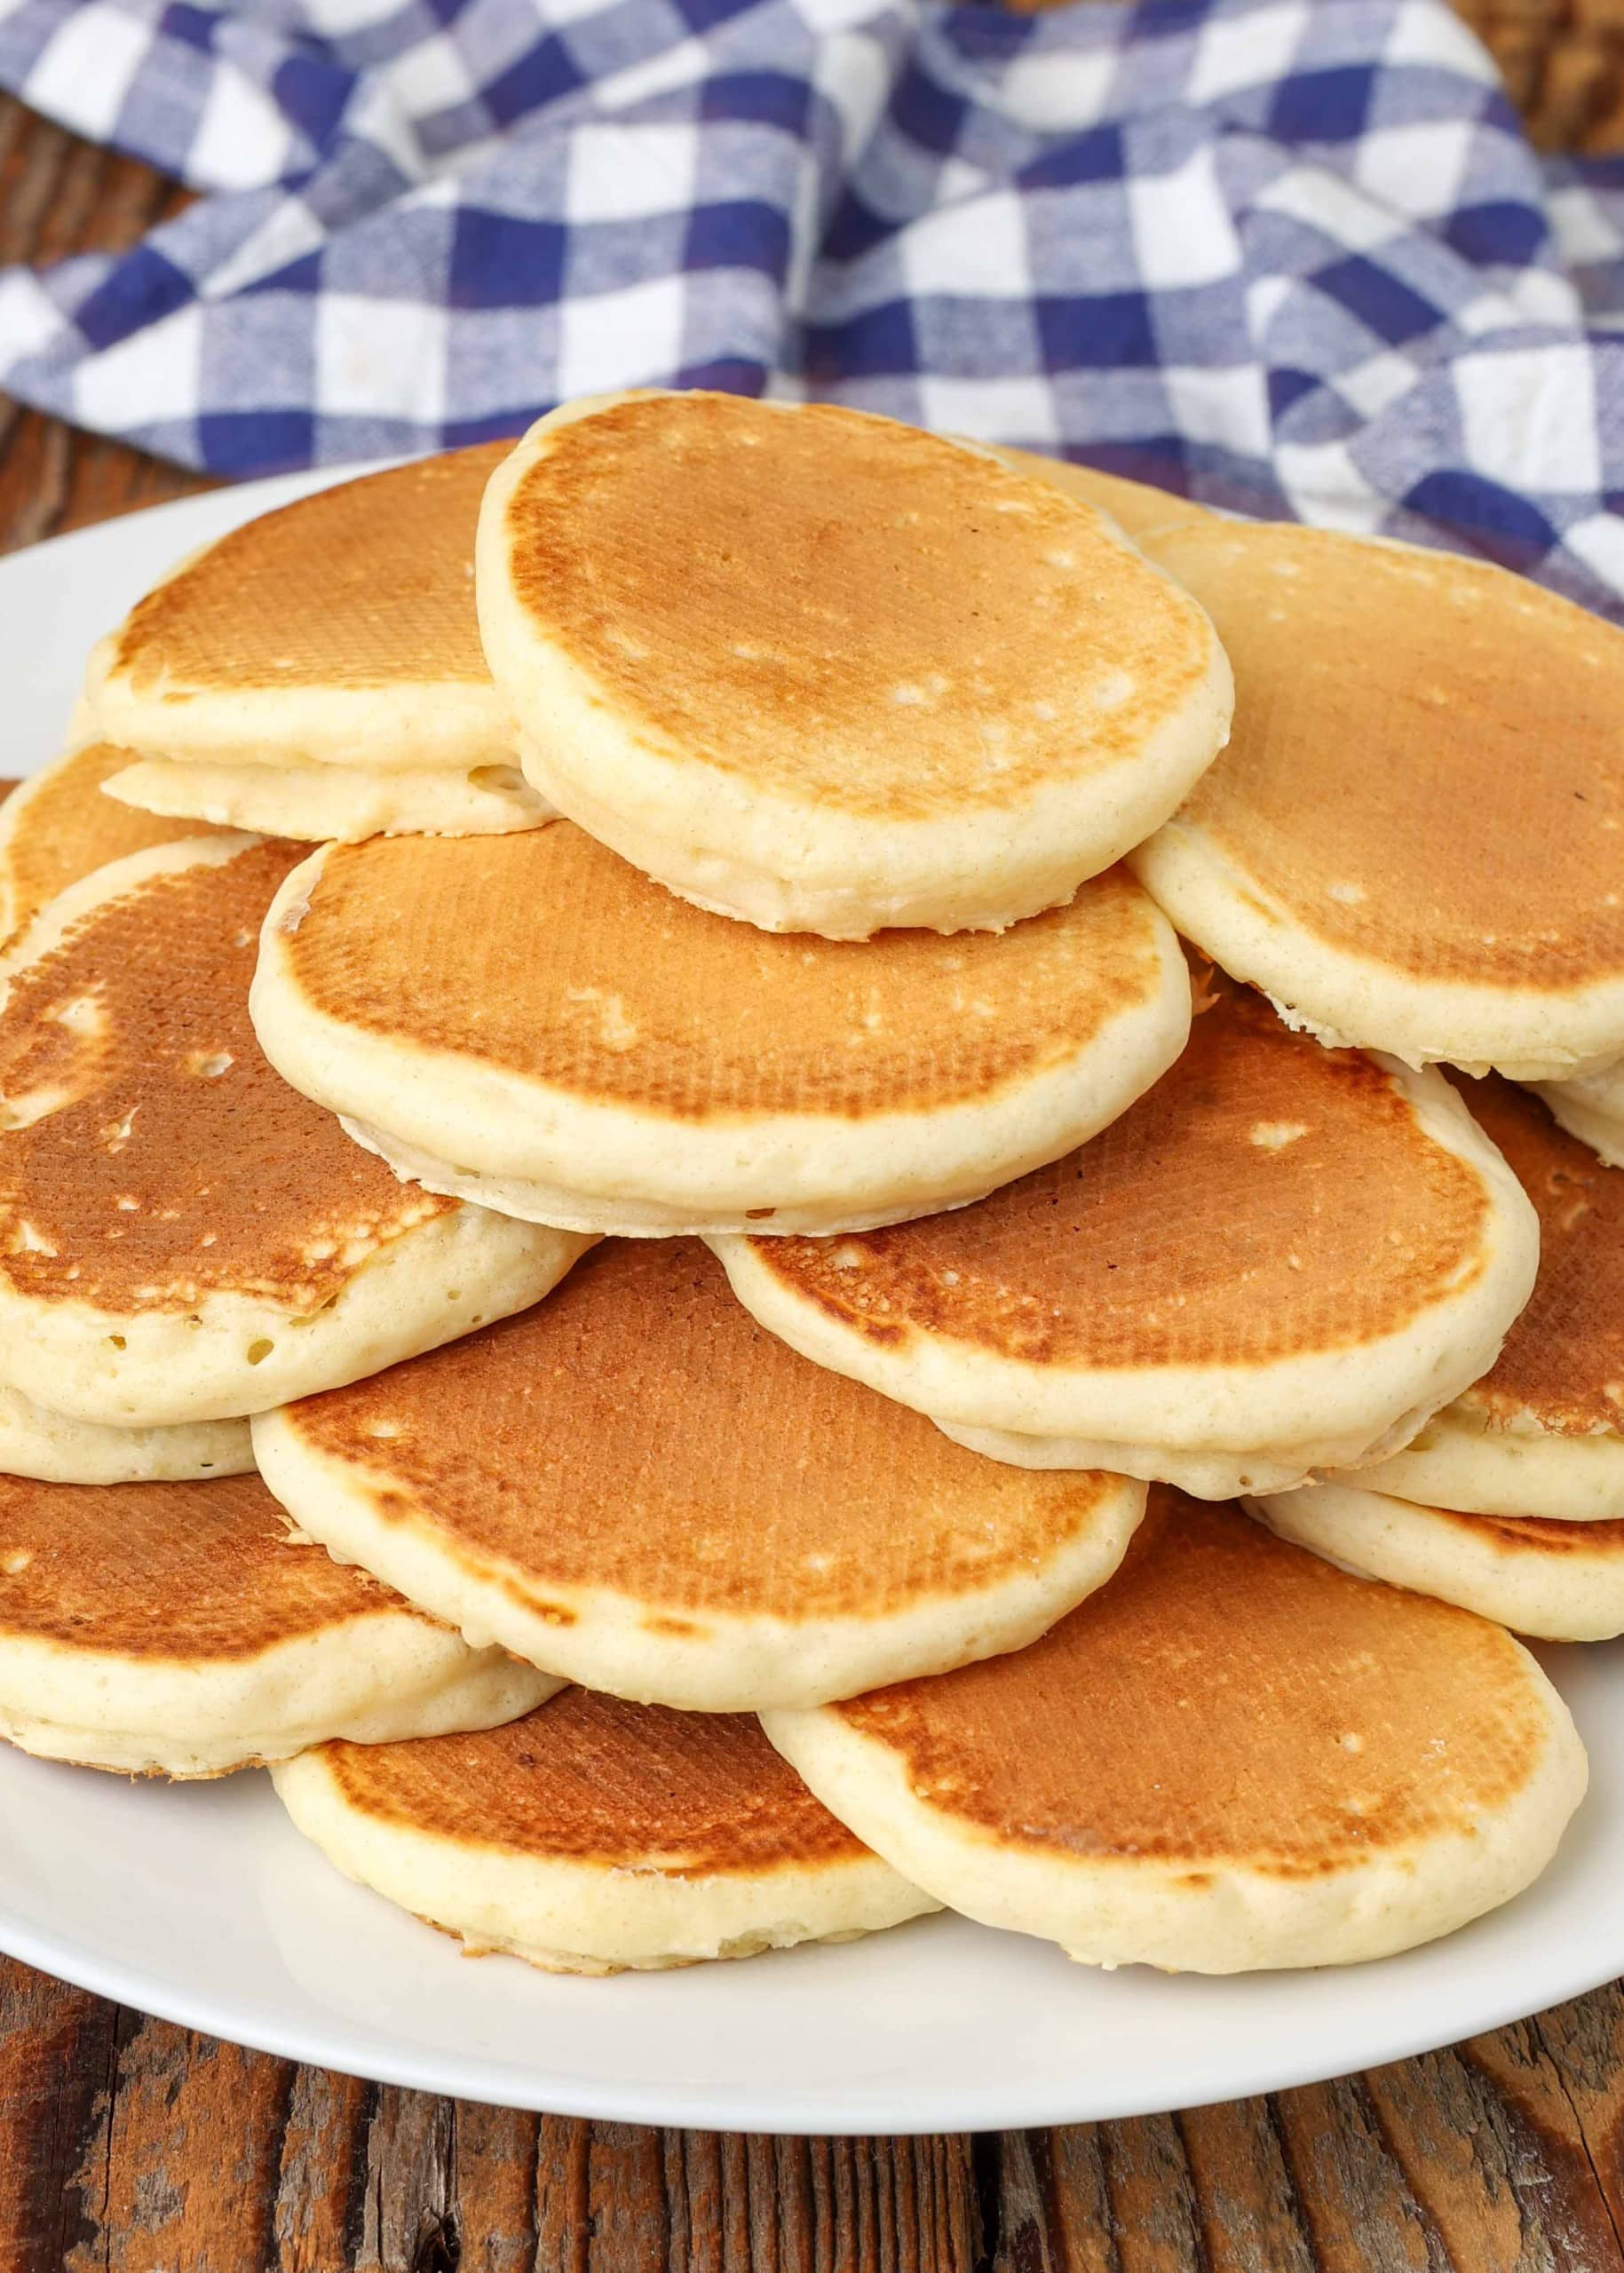 https://chocolatewithgrace.com/wp-content/uploads/2022/11/Silver-Dollar-Pancakes-CWG-3-1-of-1-scaled.jpg